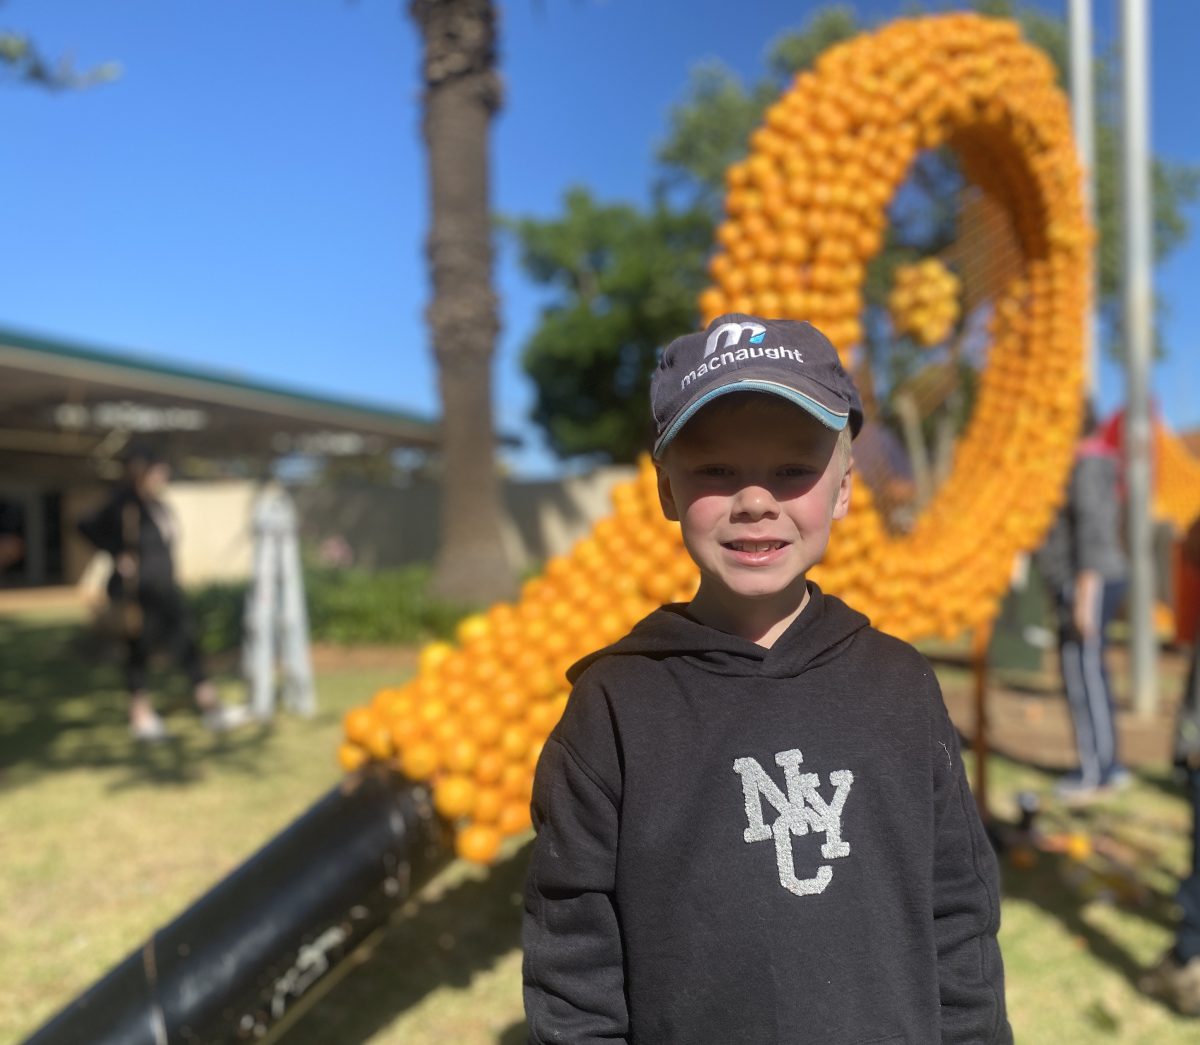 boy and giant sculpture made from oranges